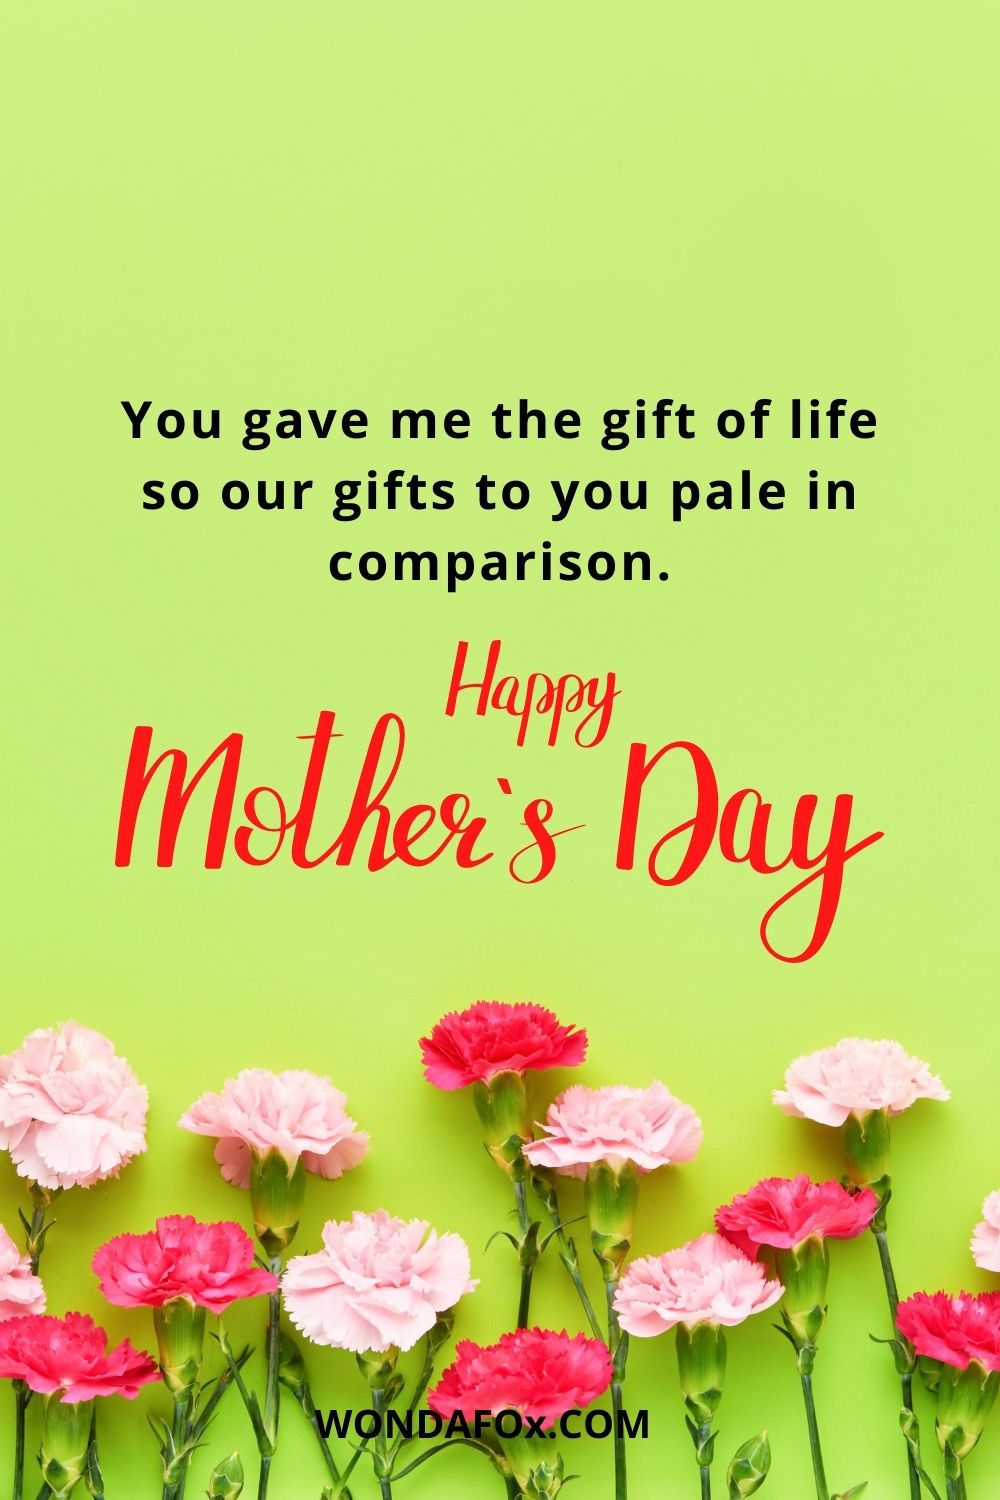 You gave me the gift of life so our gifts to you pale in comparison. Happy Mother’s Day!